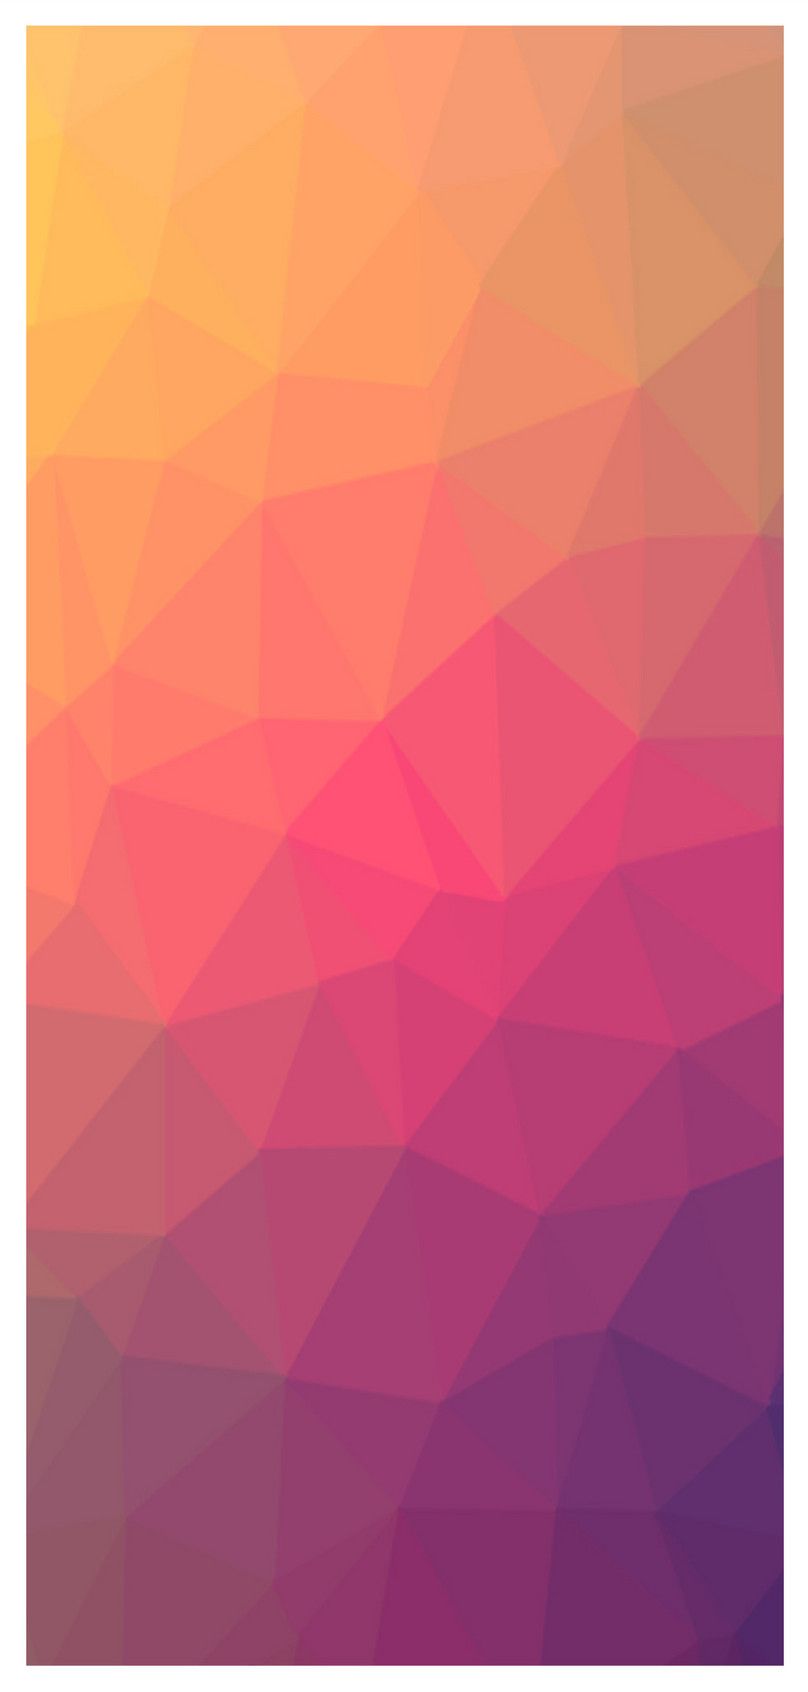 geometric background mobile phone wallpaper background image